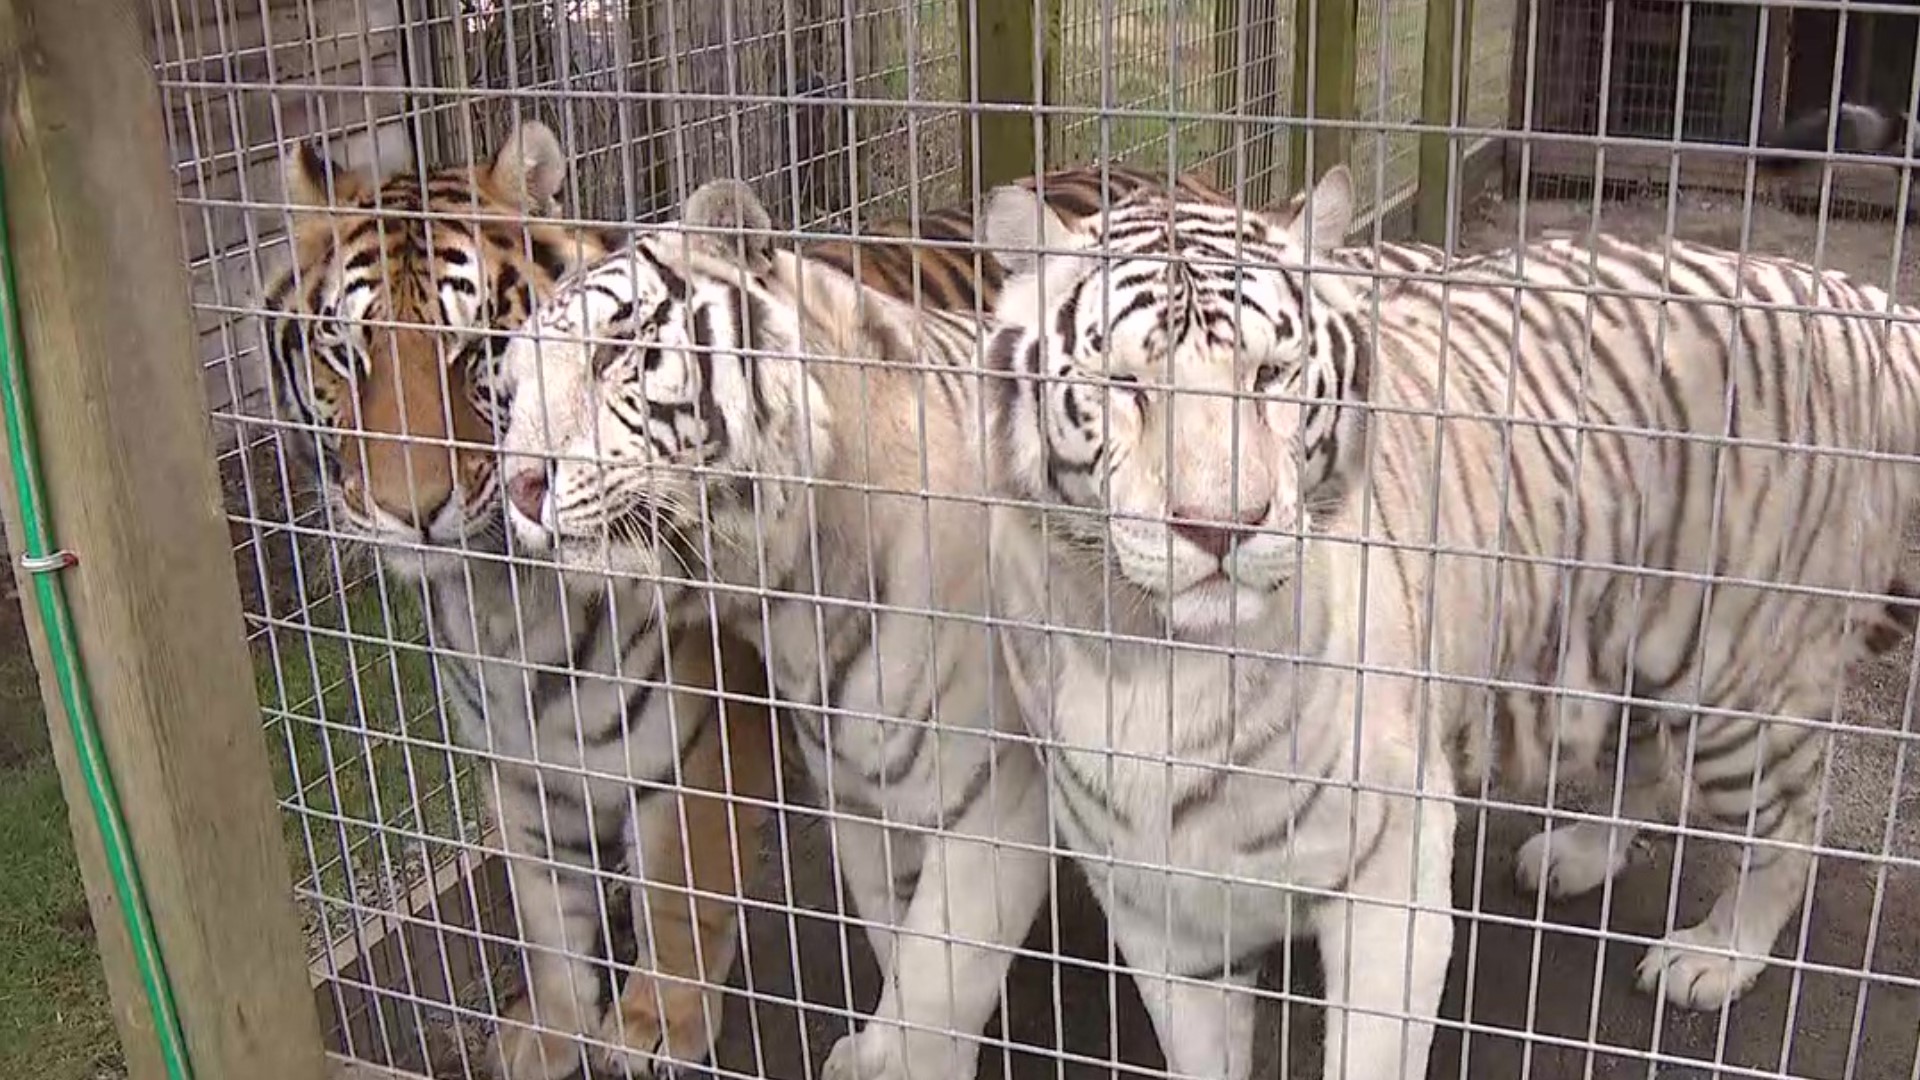 The new residents nearly double the tiger population at T & D's Cats of the World.